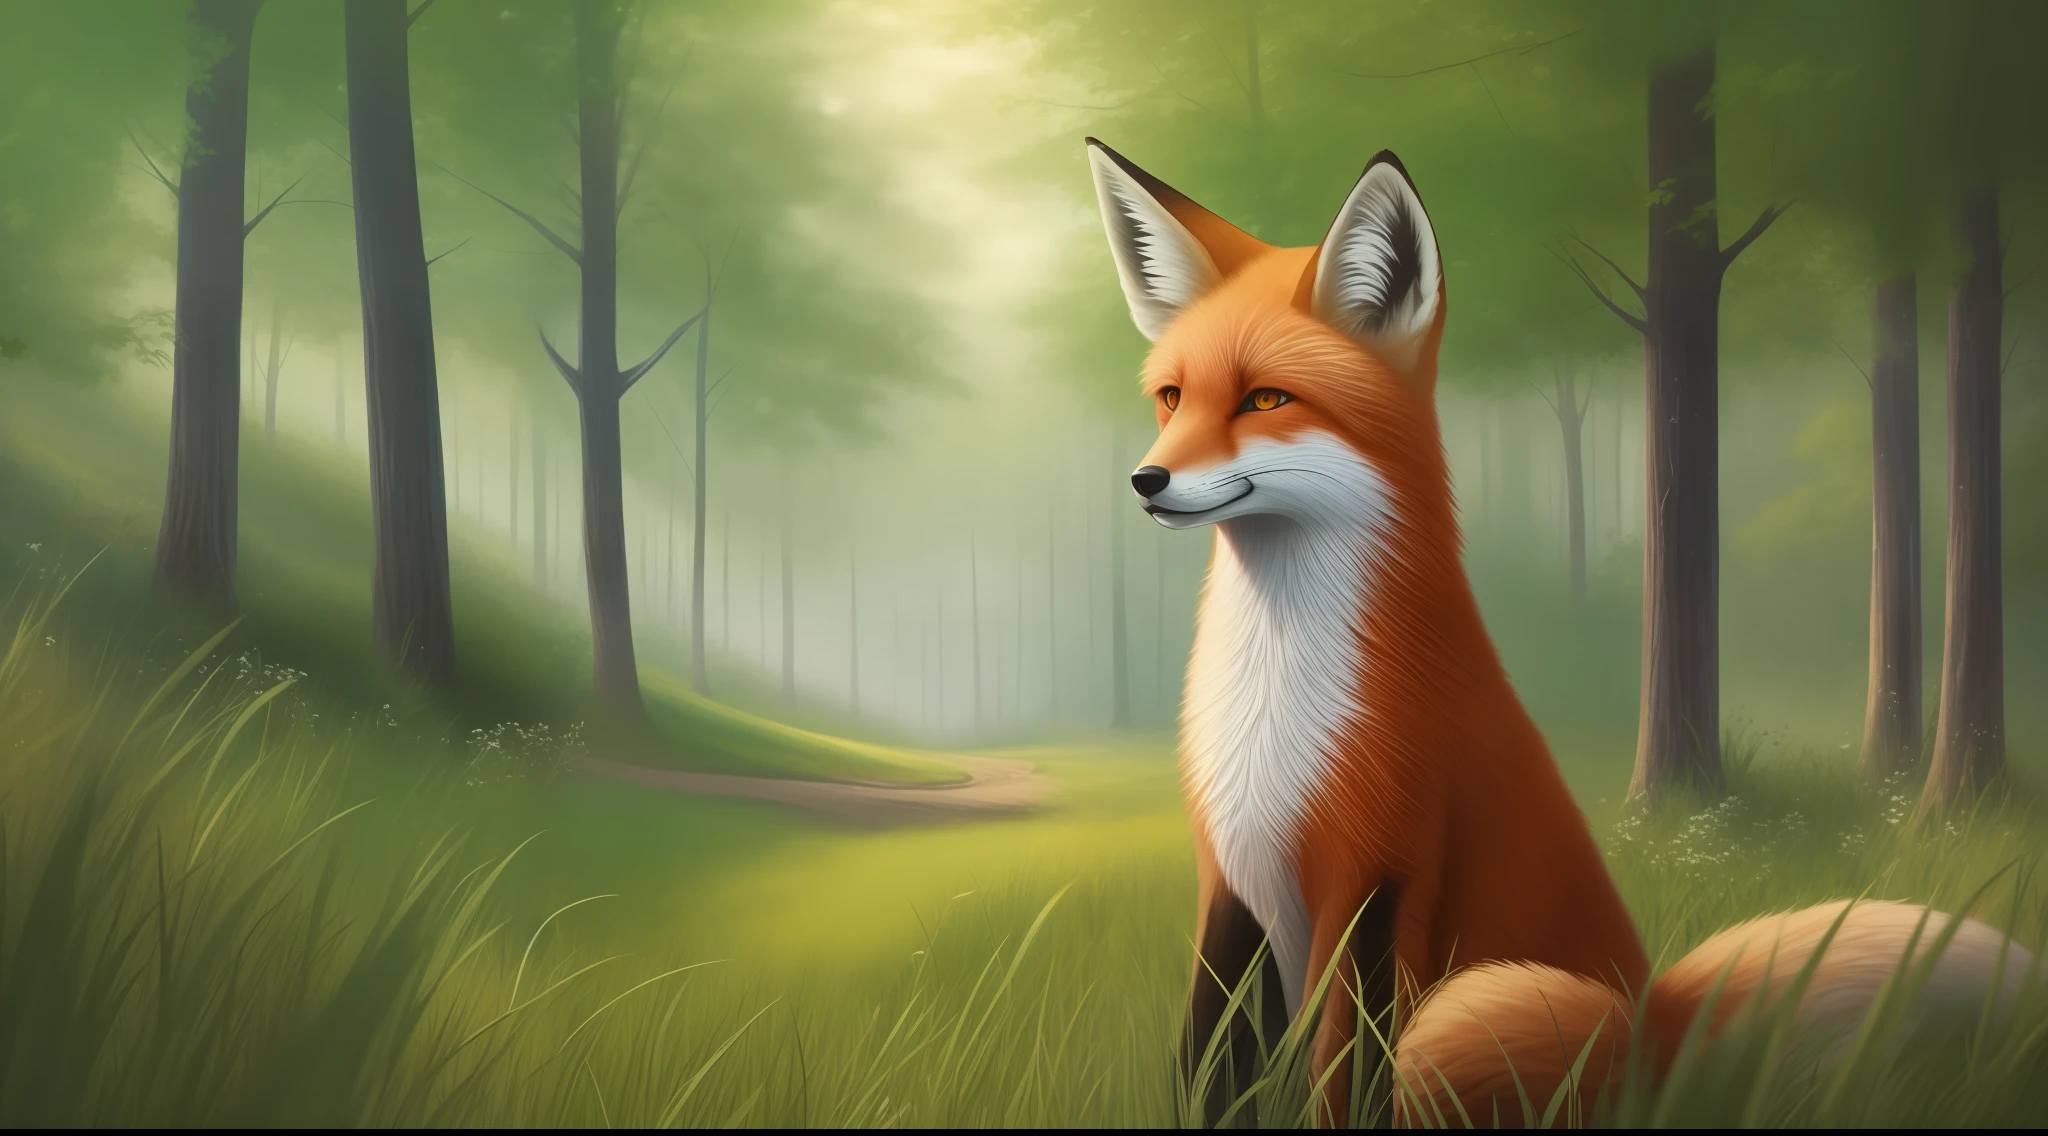 tmasterpiece，High Picture Quality，Science fiction style，Realistic painting style，Scenery dominant，grass field、ln the forest，A fox in a cultivated field。